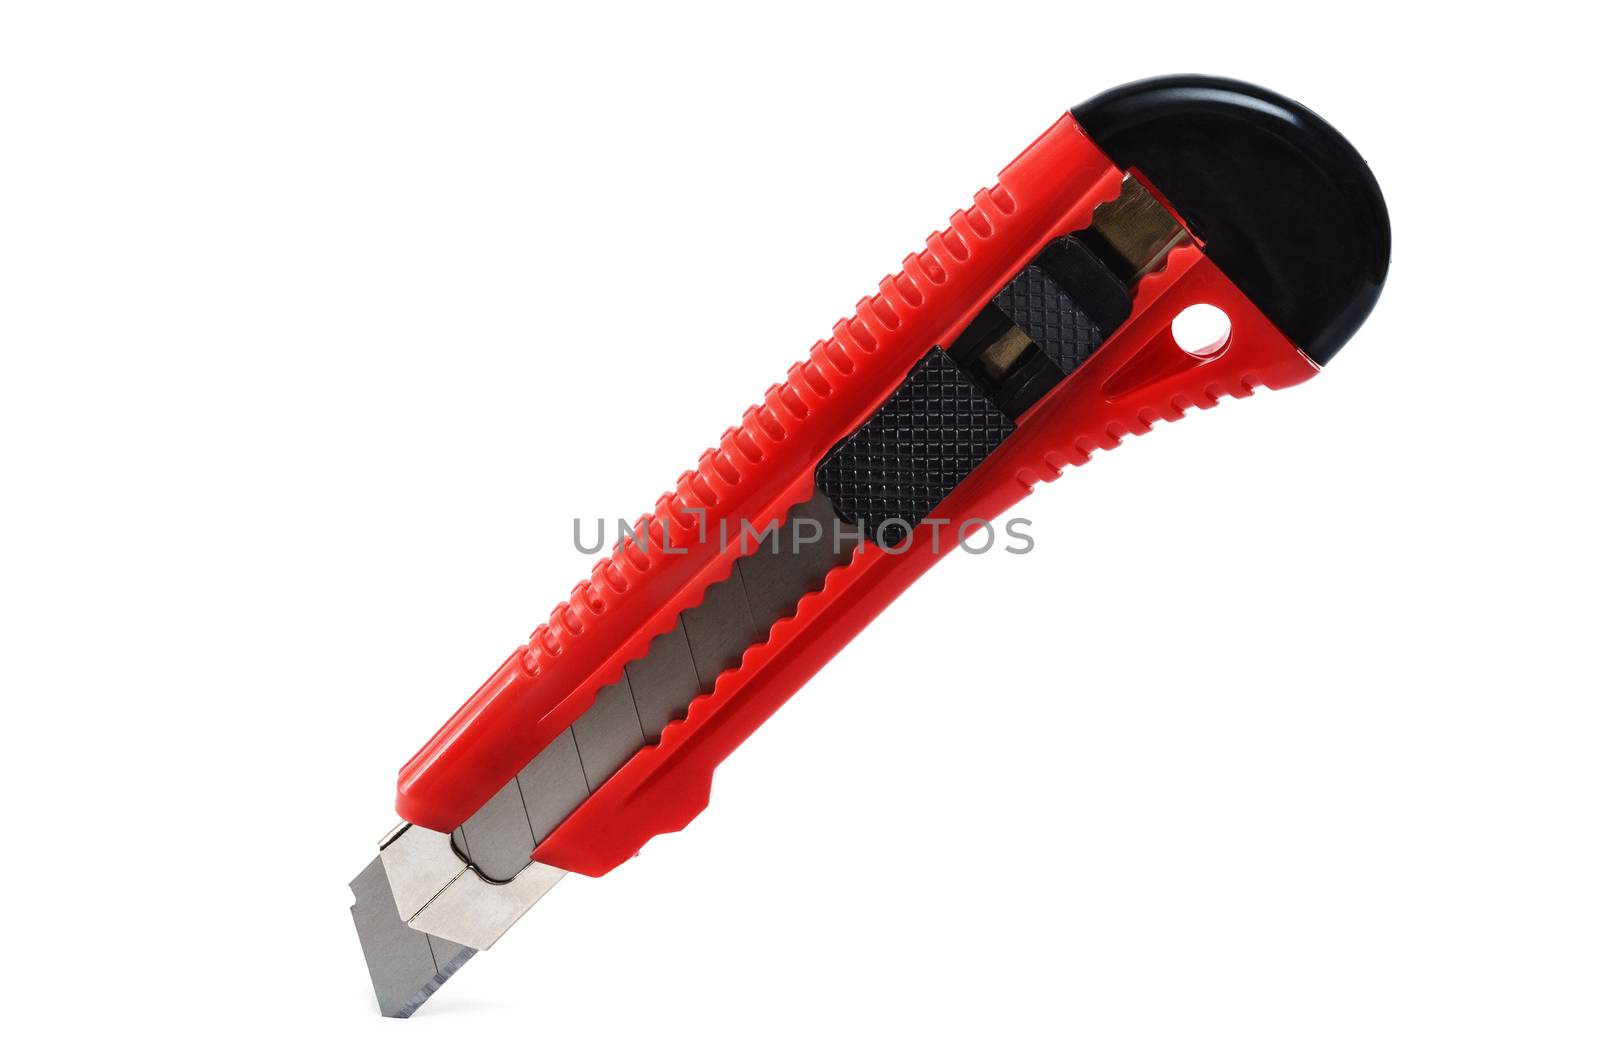 cutter with red handle isolated on white background

